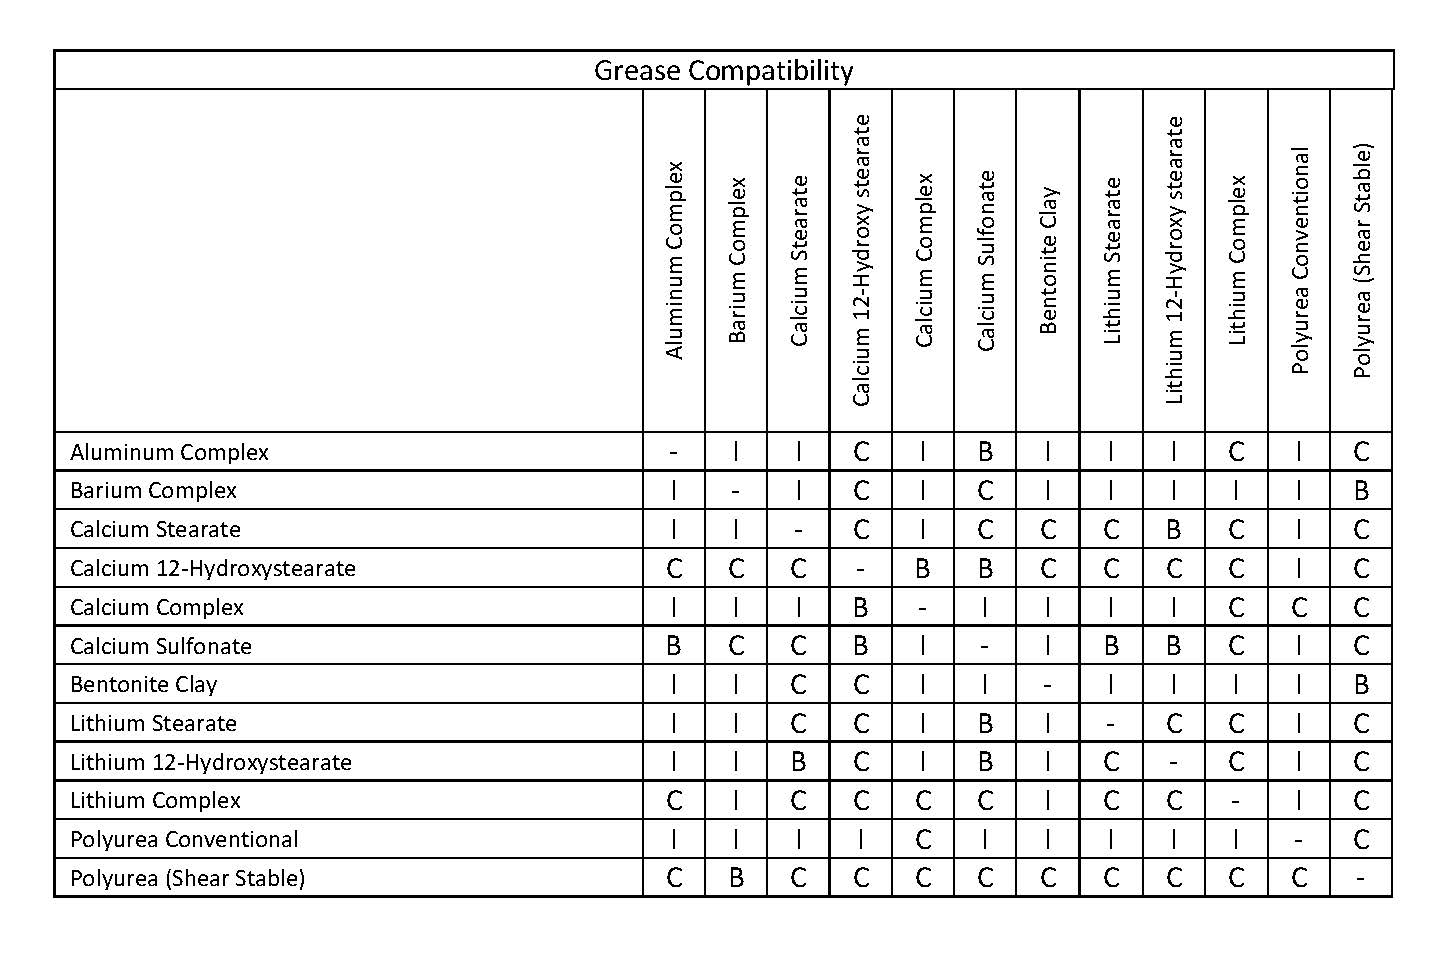 Diesel Compatibility Chart